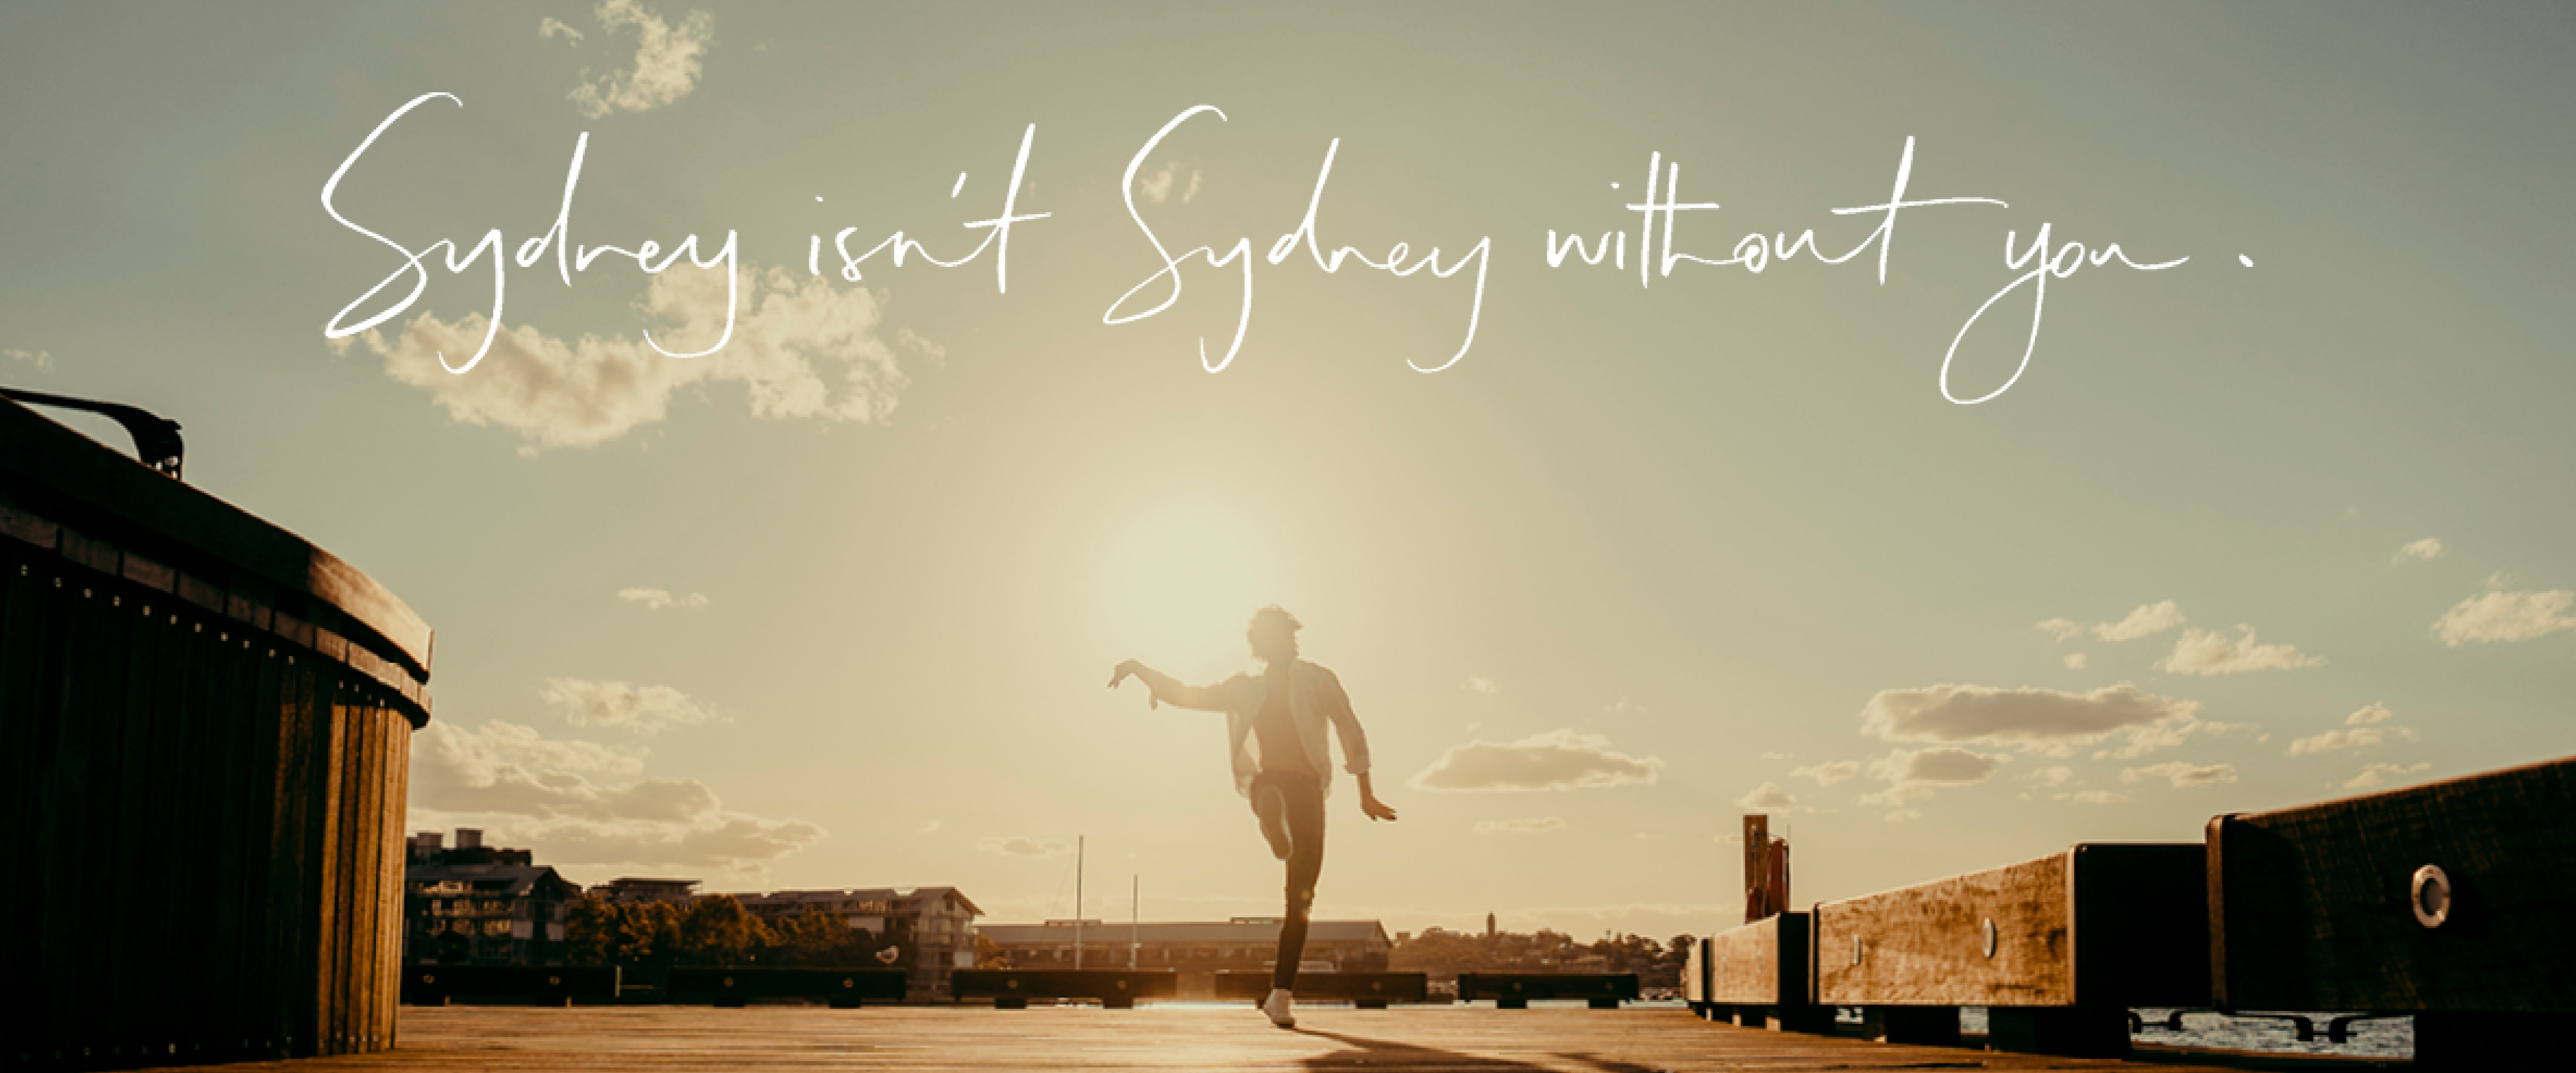 website-header-images_sydney-without-you-03-1445x602px